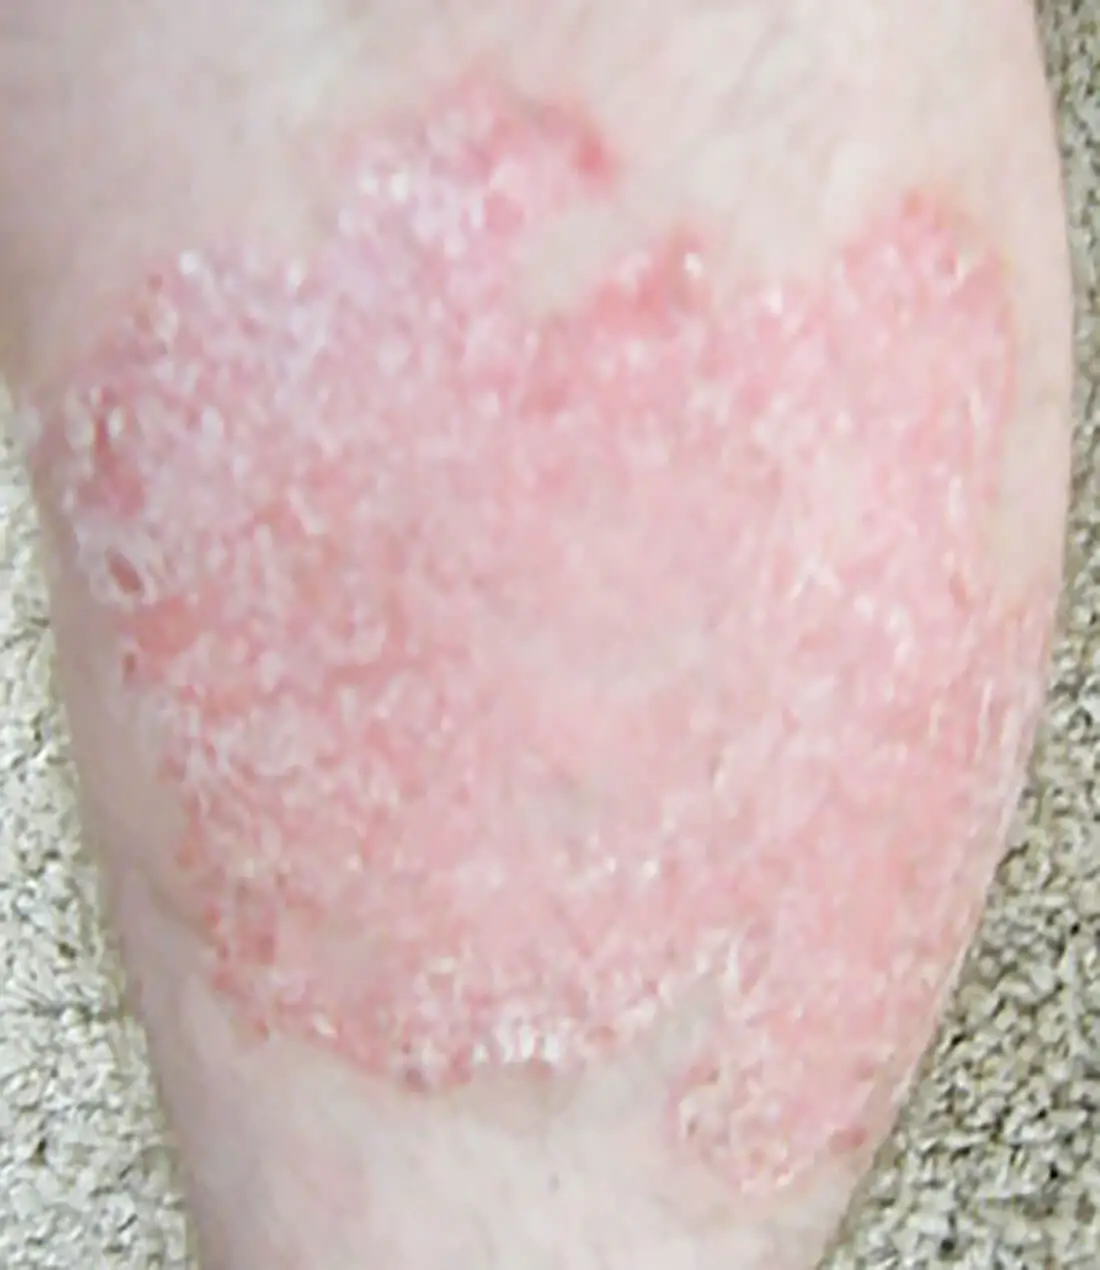 Large Psoriasis Patch On The Leg